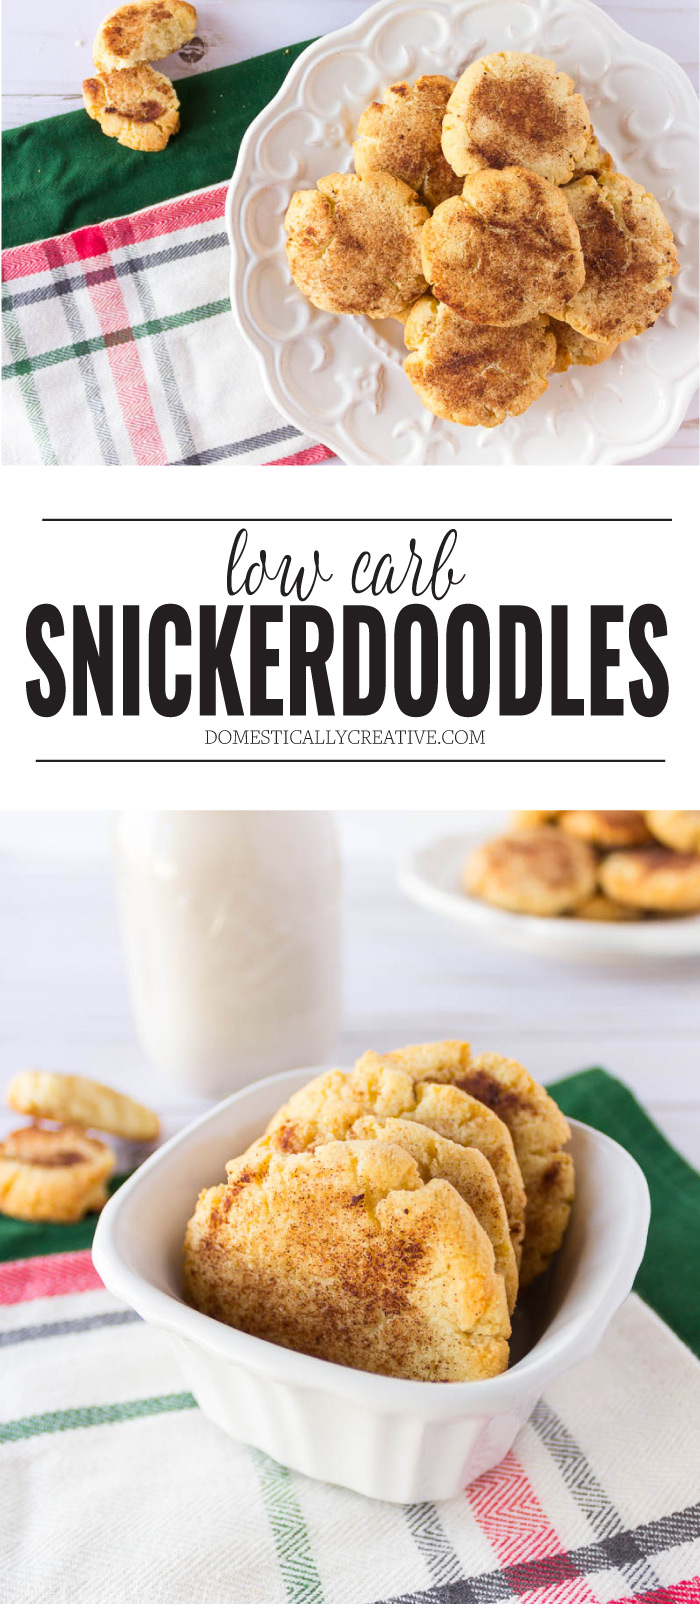 Low carb snickerdoodles cookie recipe #christmascookies #christmascookierecipe #lowcarbcookierecipe #lowcarbsnickerdoodles